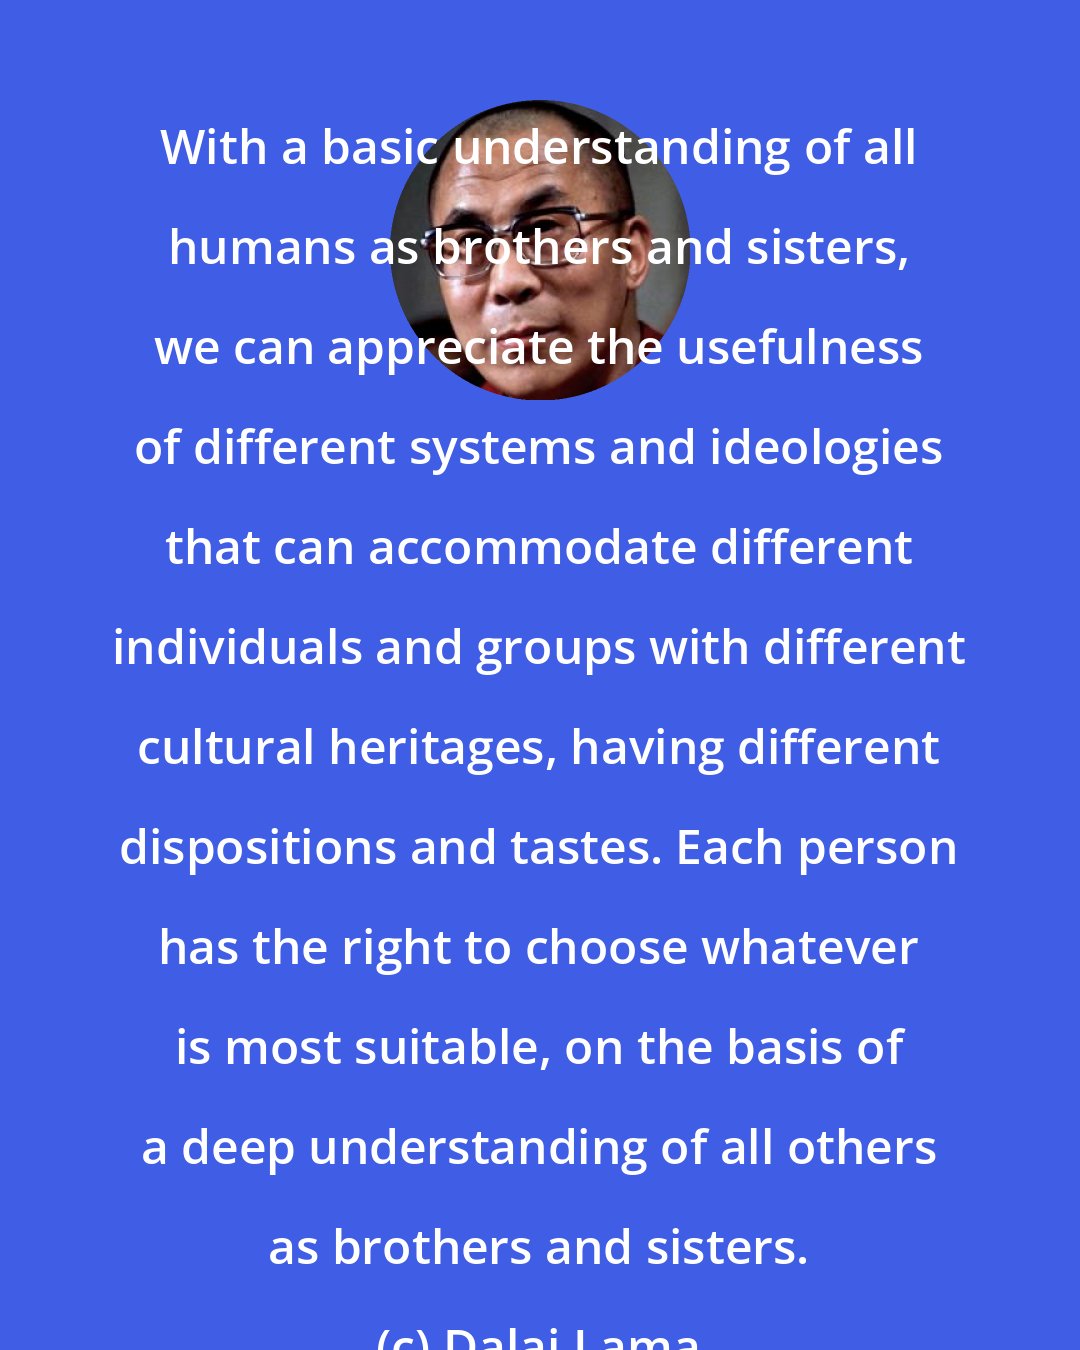 Dalai Lama: With a basic understanding of all humans as brothers and sisters, we can appreciate the usefulness of different systems and ideologies that can accommodate different individuals and groups with different cultural heritages, having different dispositions and tastes. Each person has the right to choose whatever is most suitable, on the basis of a deep understanding of all others as brothers and sisters.